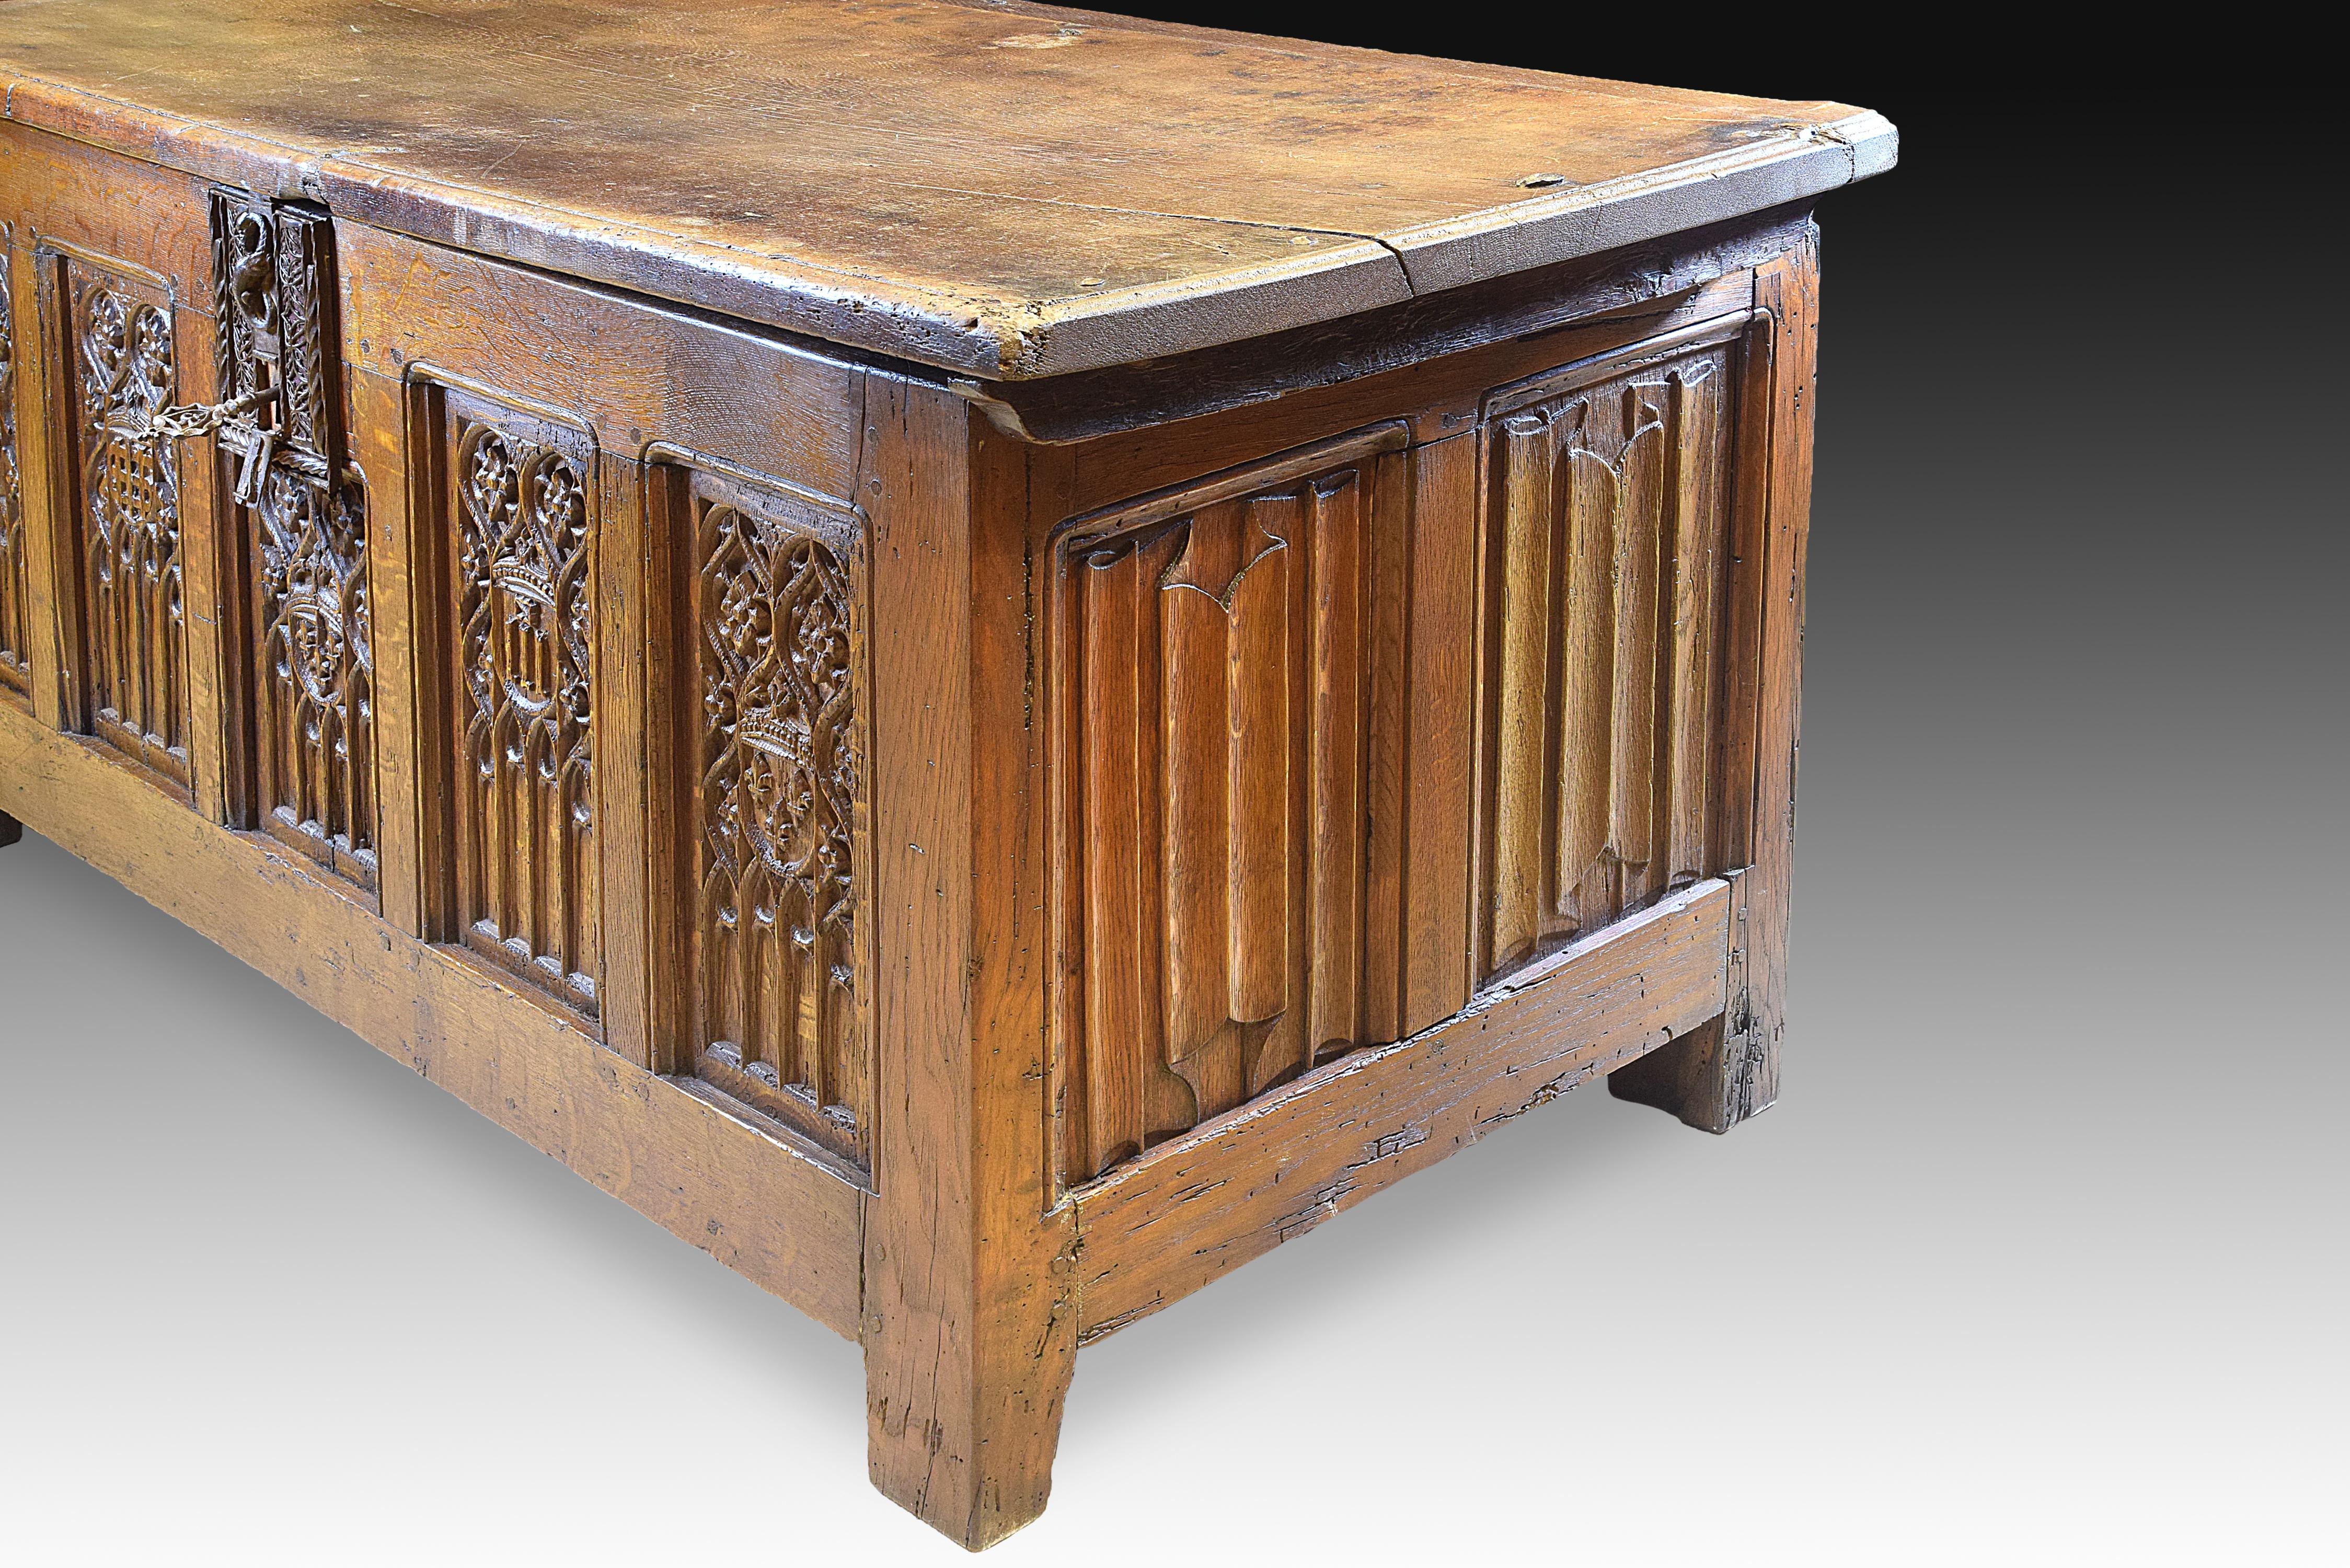 Rectangular chest with flat top and square quadrangular legs, decorated on the fronts with different elements framed in rectangles with curved beveled corners. On the sides, there is a size called 